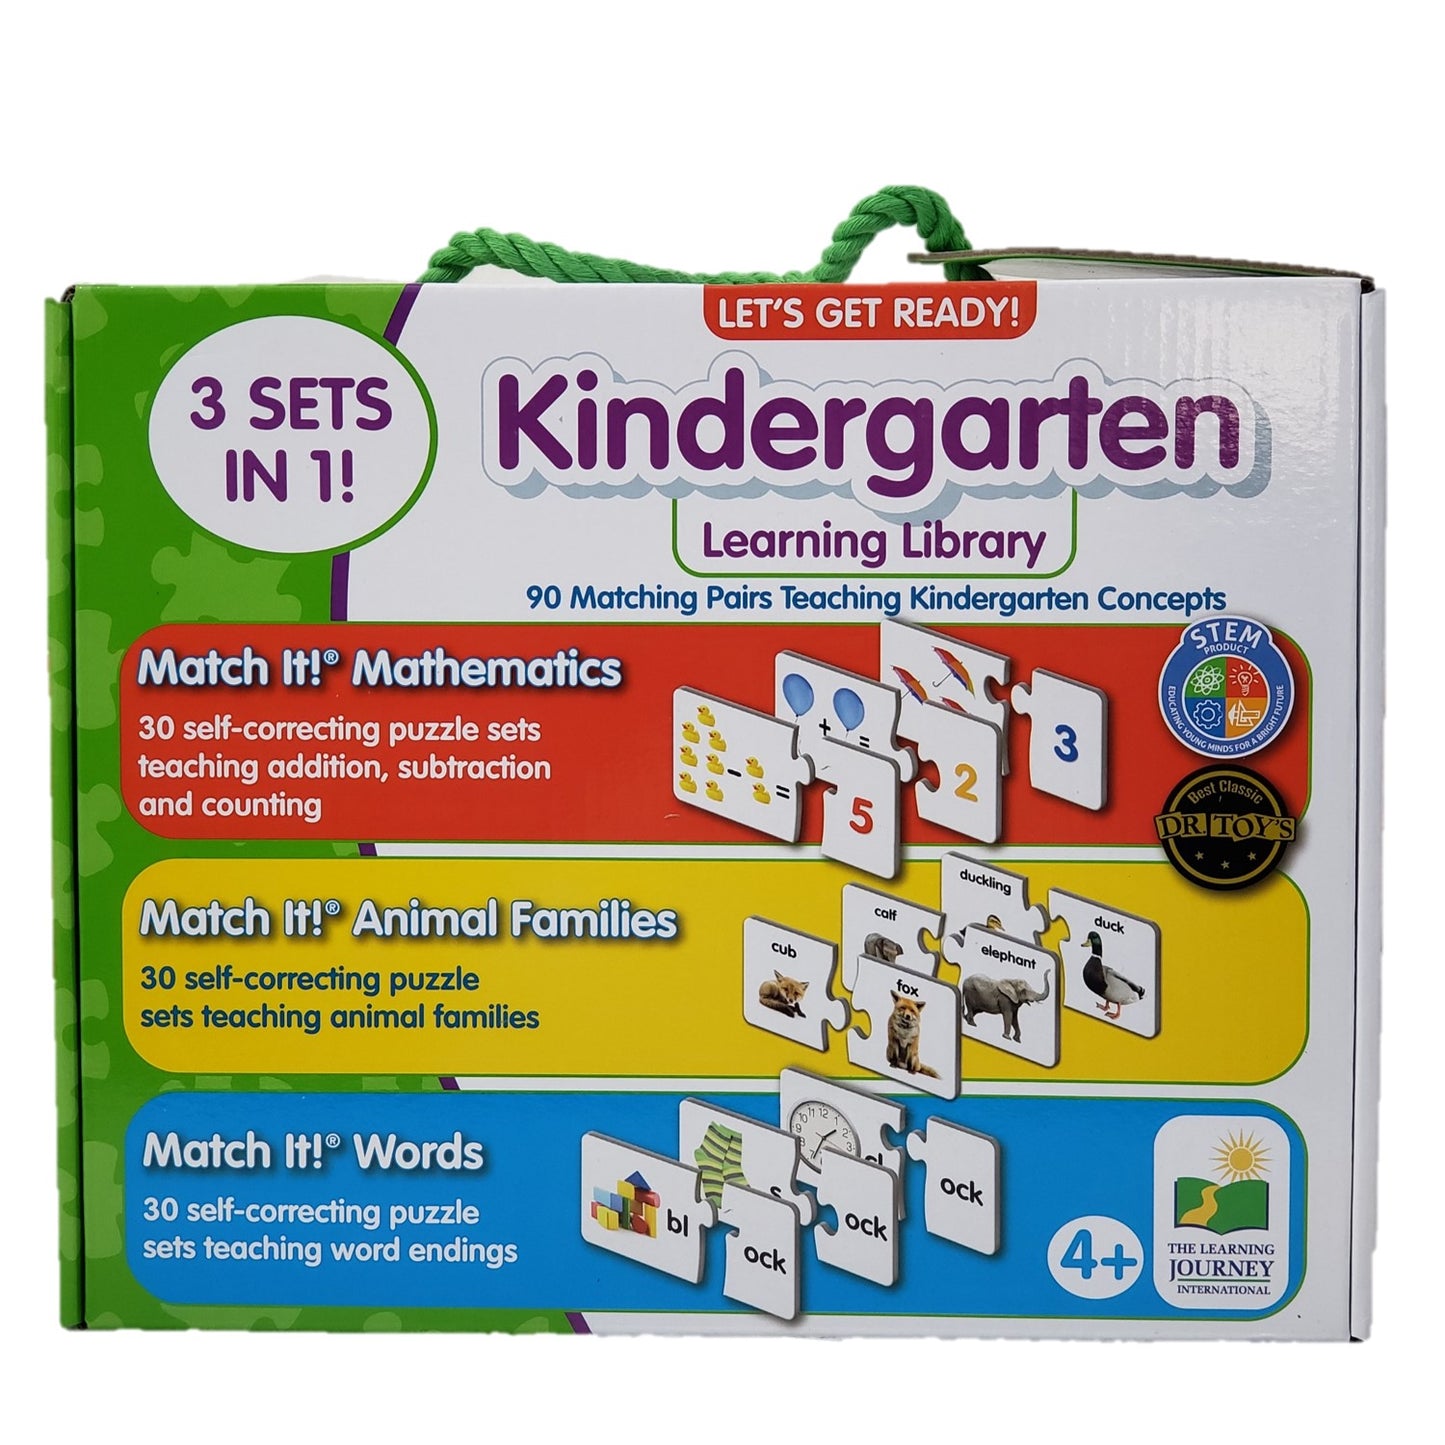 Learning Library Kindergarten Mathematics, Animal Families, Words - 3 Sets in 1